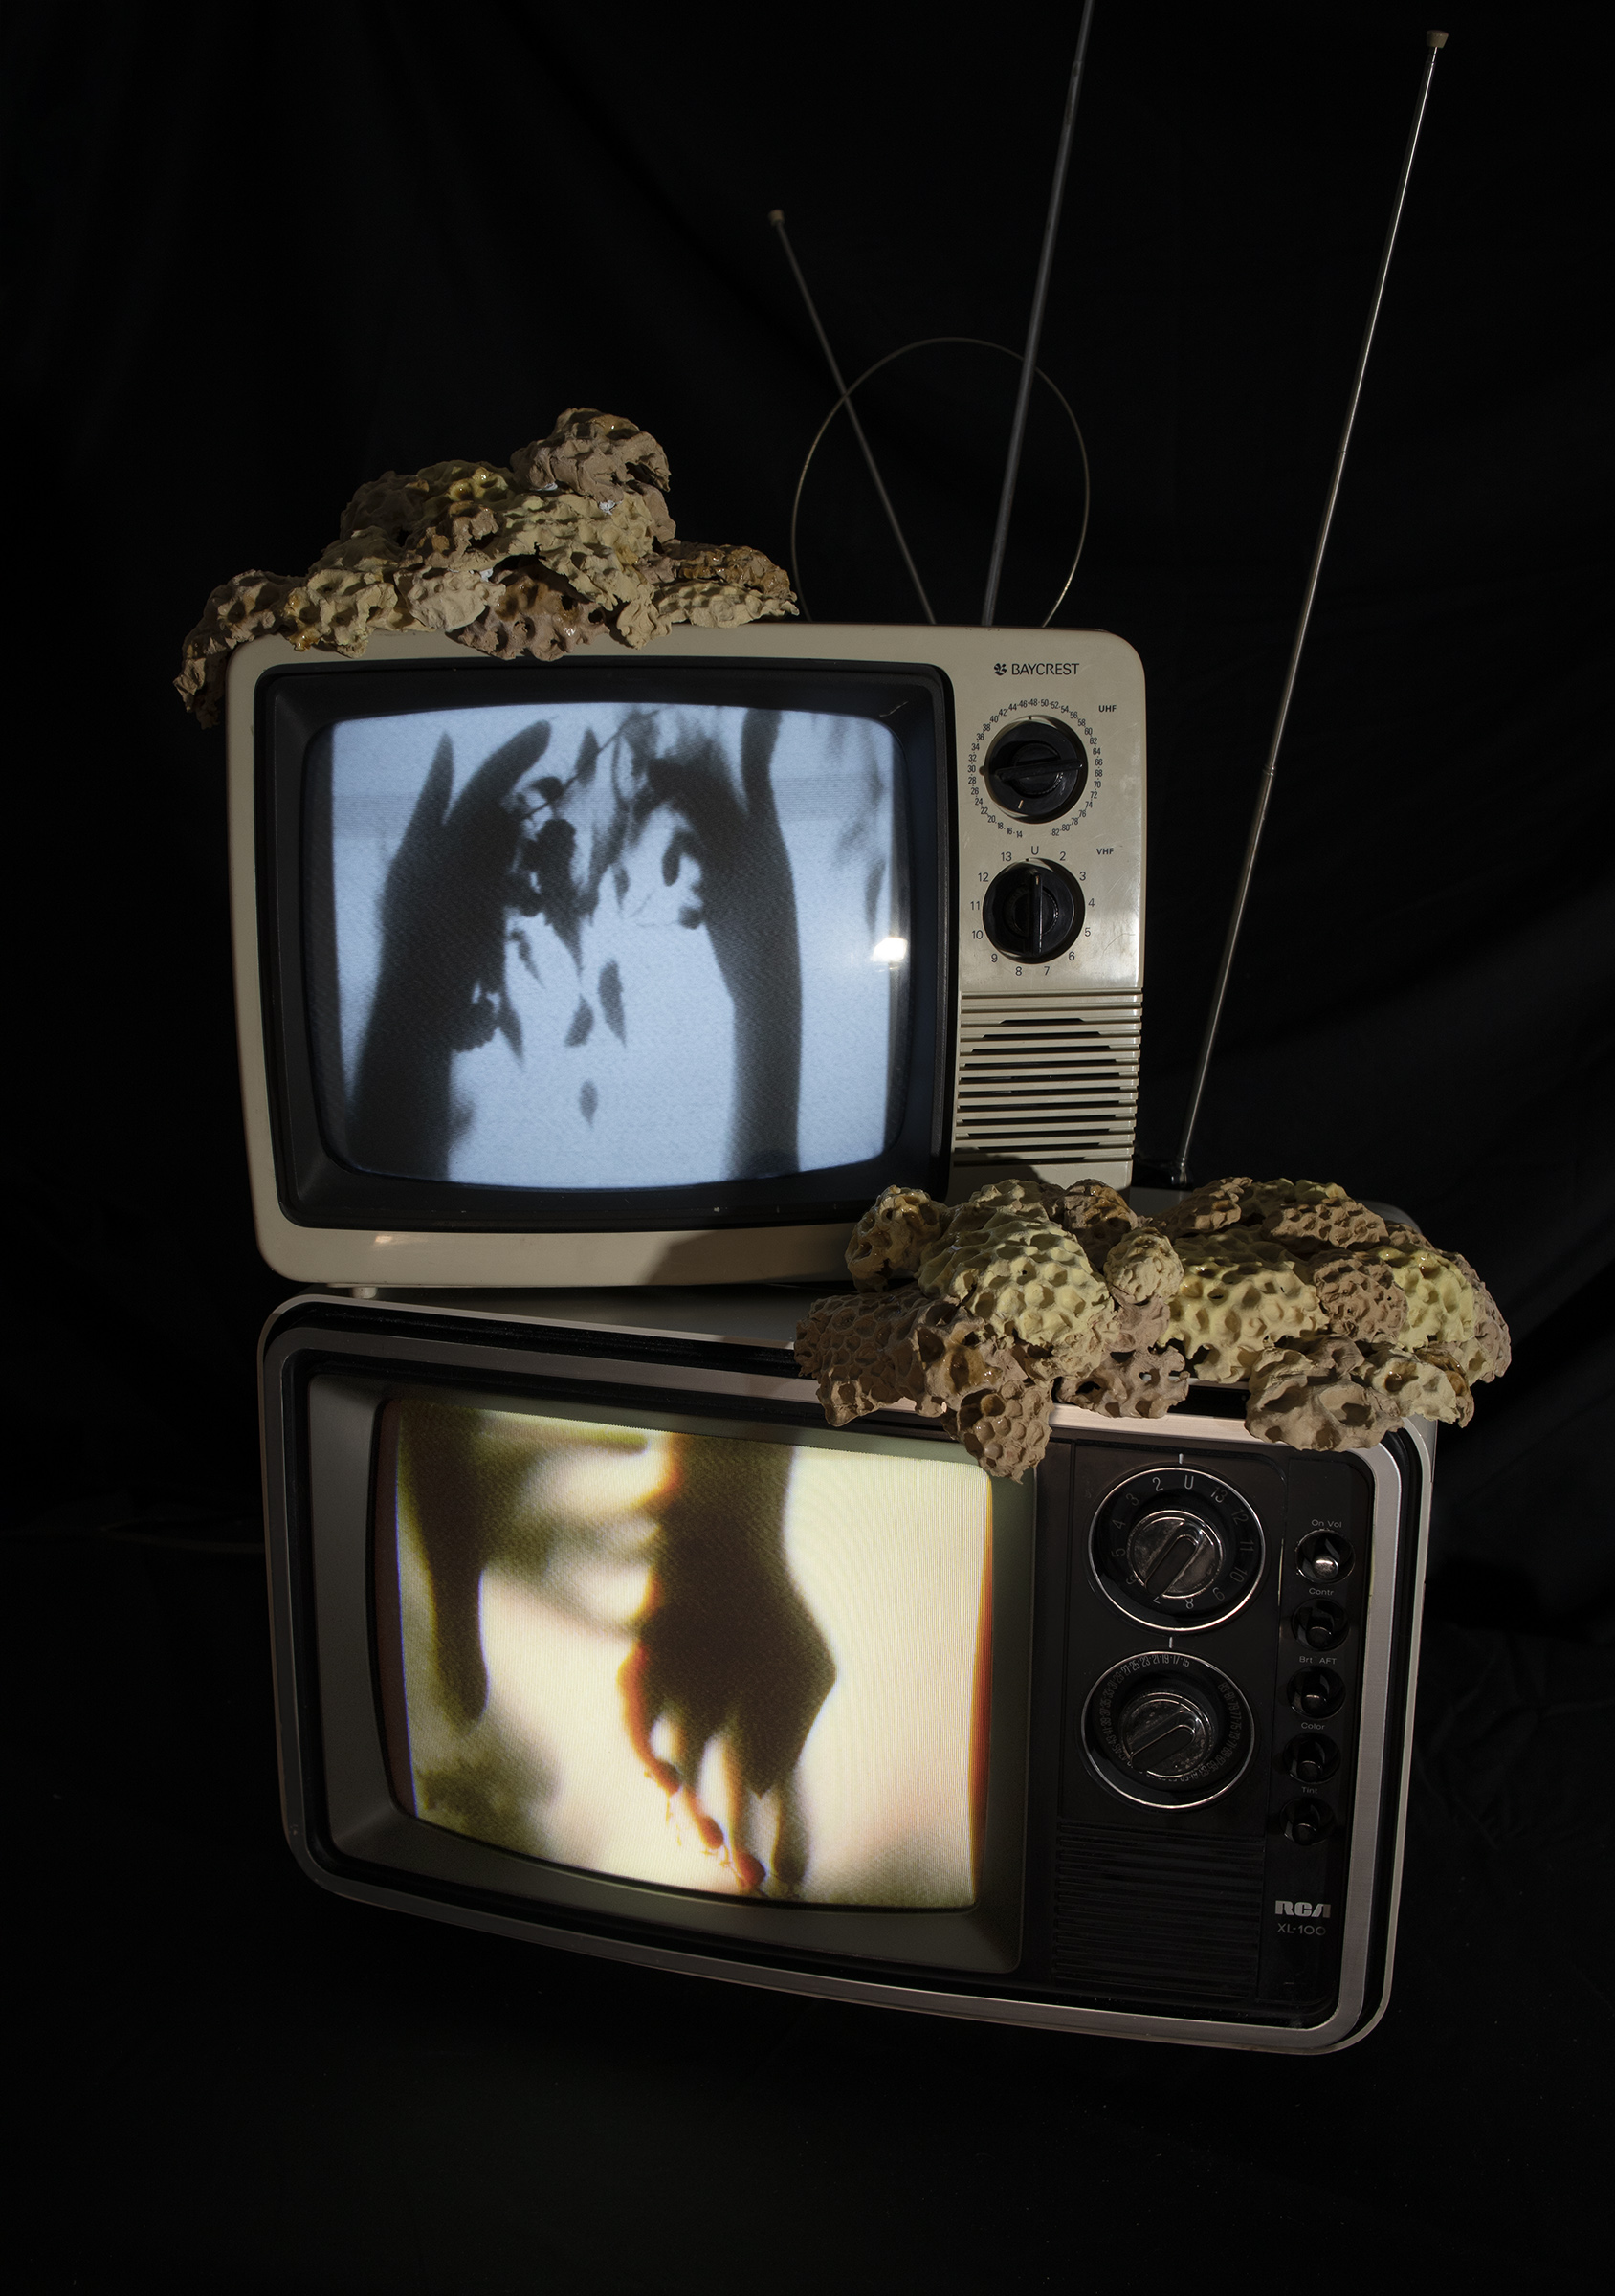 Signal Wicking, 2021. Video installation with ceramics and two CRT-TVs. Nurielle Stern.